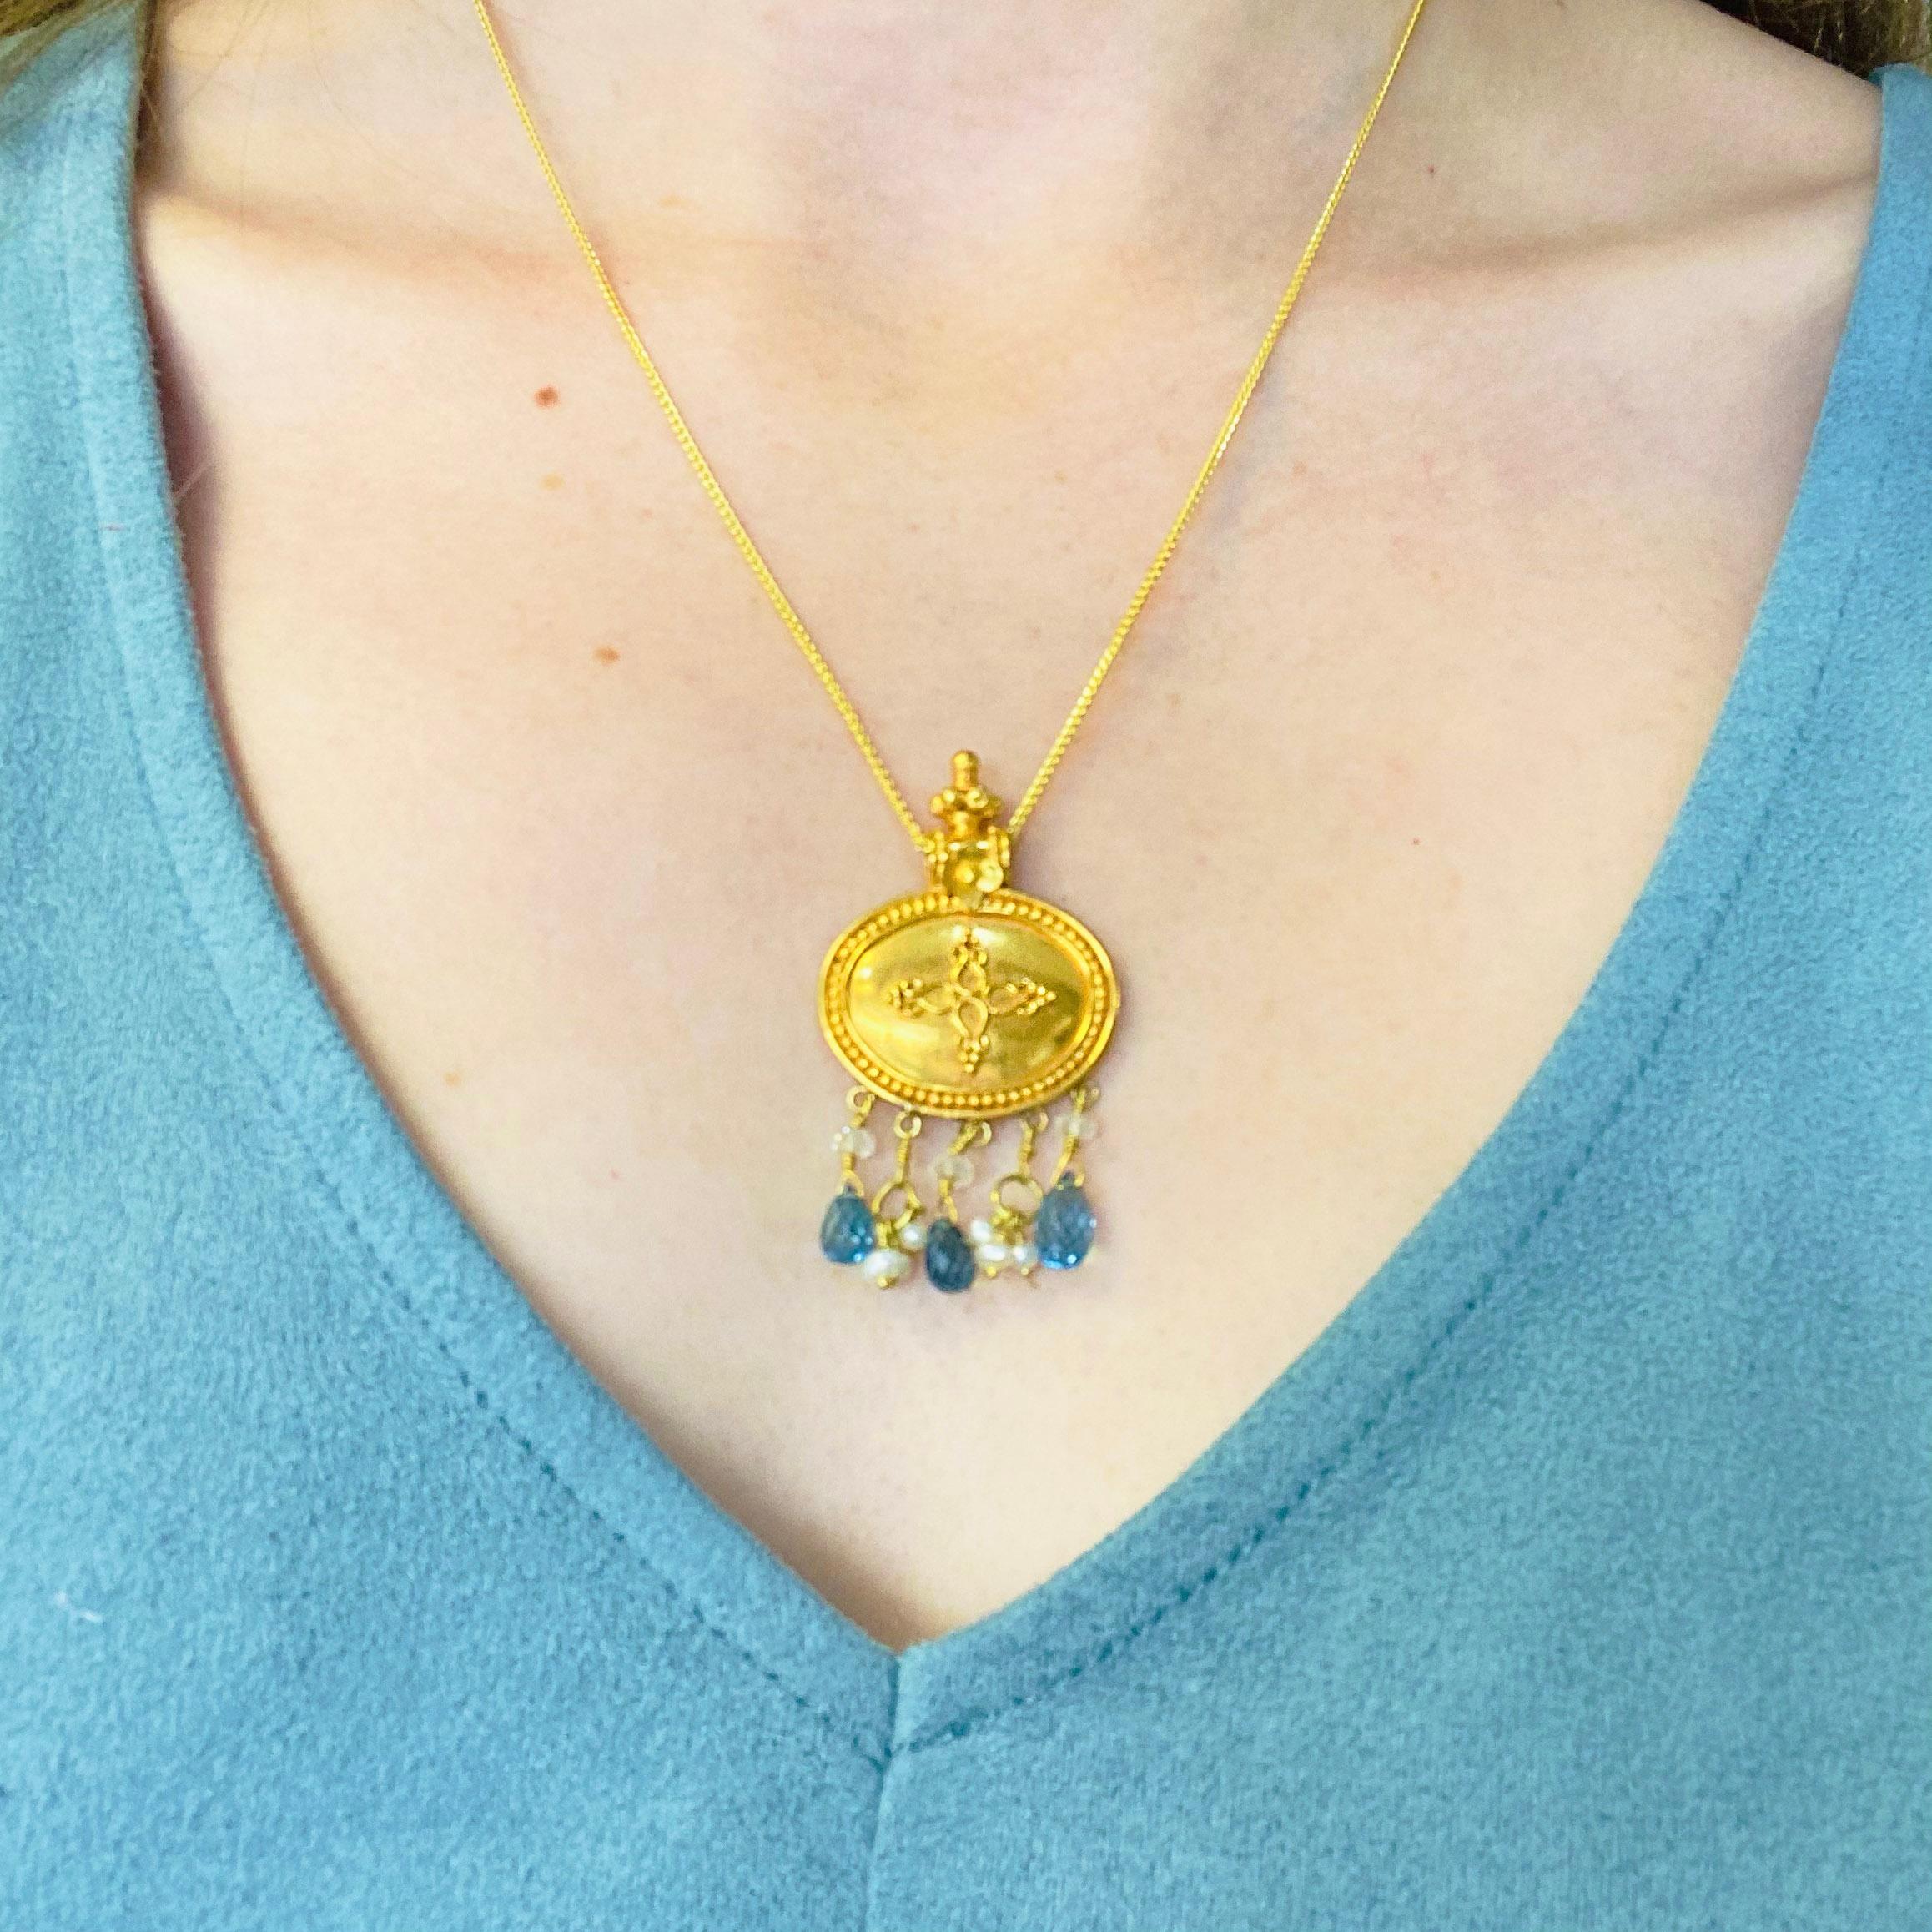 This exquisite 22k yellow gold pendant is truly one of a kind! Adorned with delicate dangling blue topaz briolettes, seed pearls, and clear quartz, this elegant eye-catching pendant will move gracefully with its wearer throughout the day. It comes